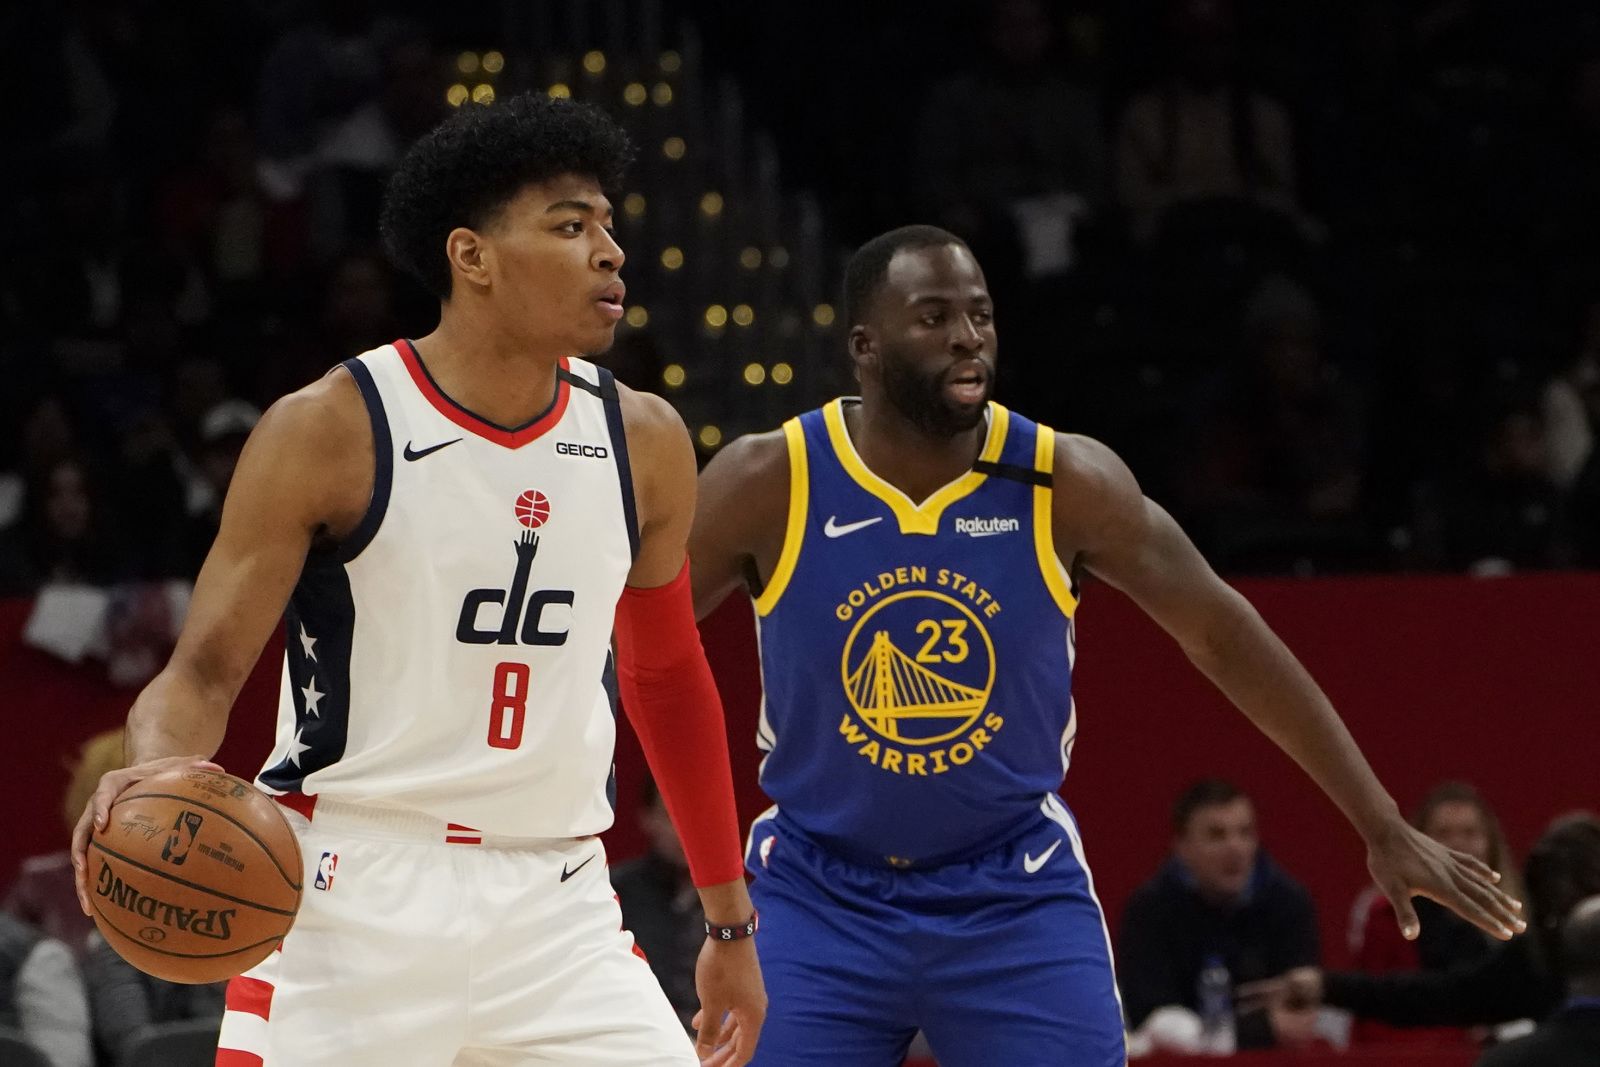 Golden State Warriors vs Washington Wizards Prediction, Betting Tips and Odds | 30 SEPTEMBER, 2022